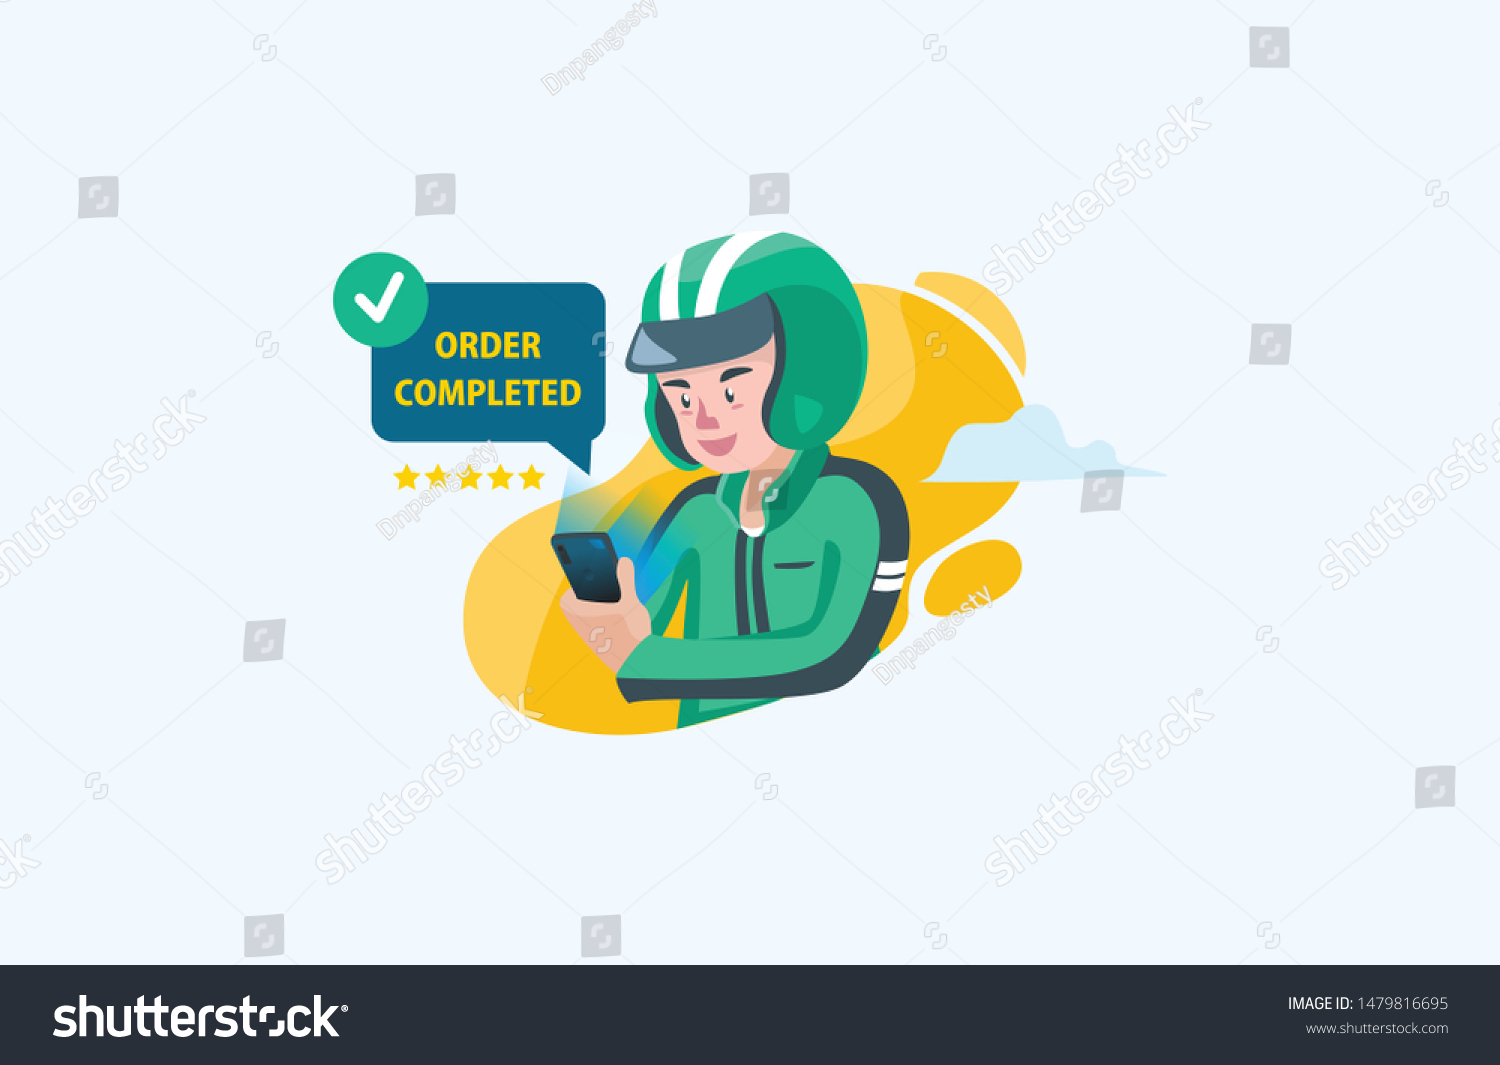 SVG of Flat style illustration of delivery man driver icon and biker completed order and successful task by costumer for ordering food service for landing page and website svg